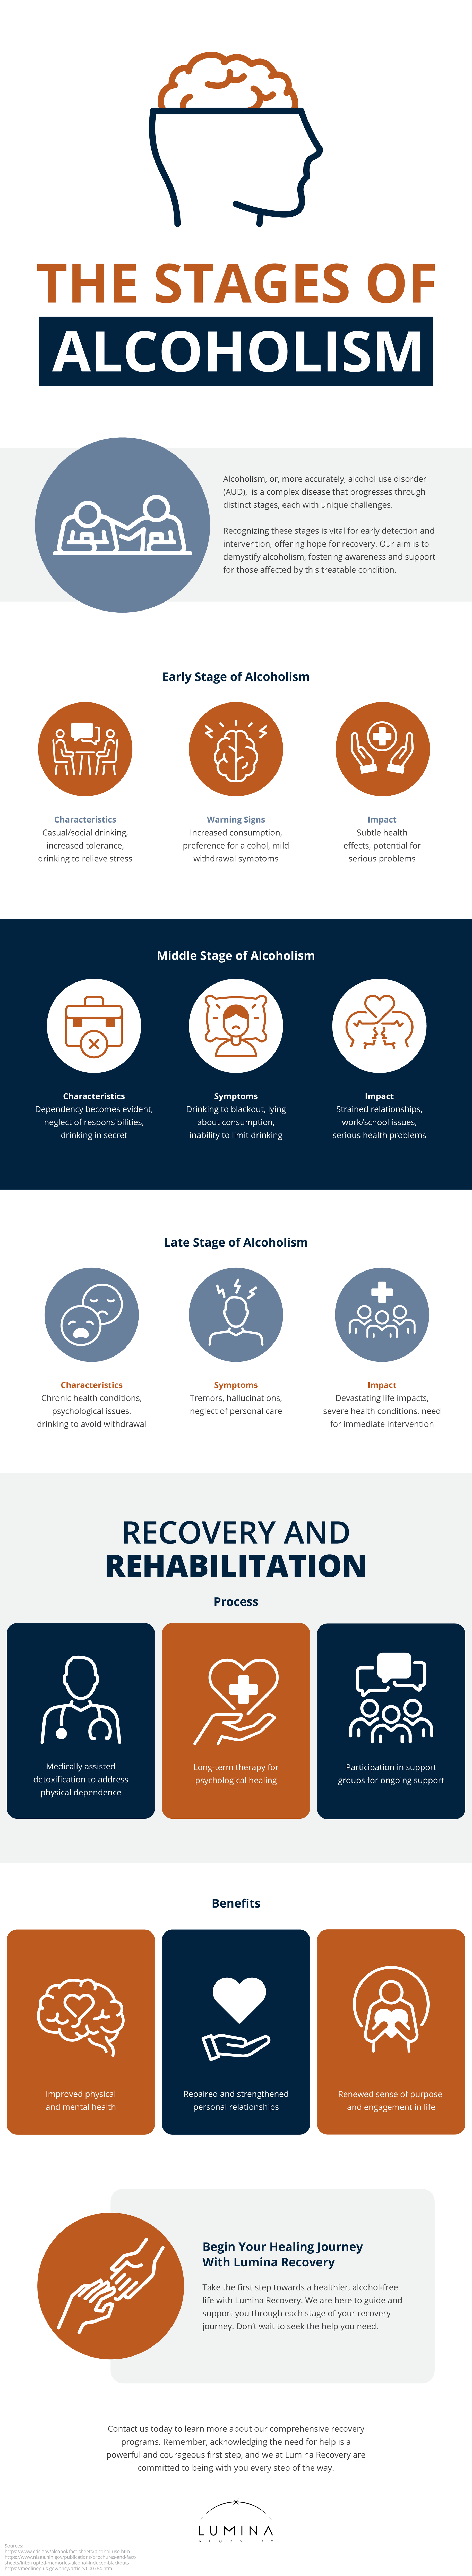 Stages of Alcoholism Infographic